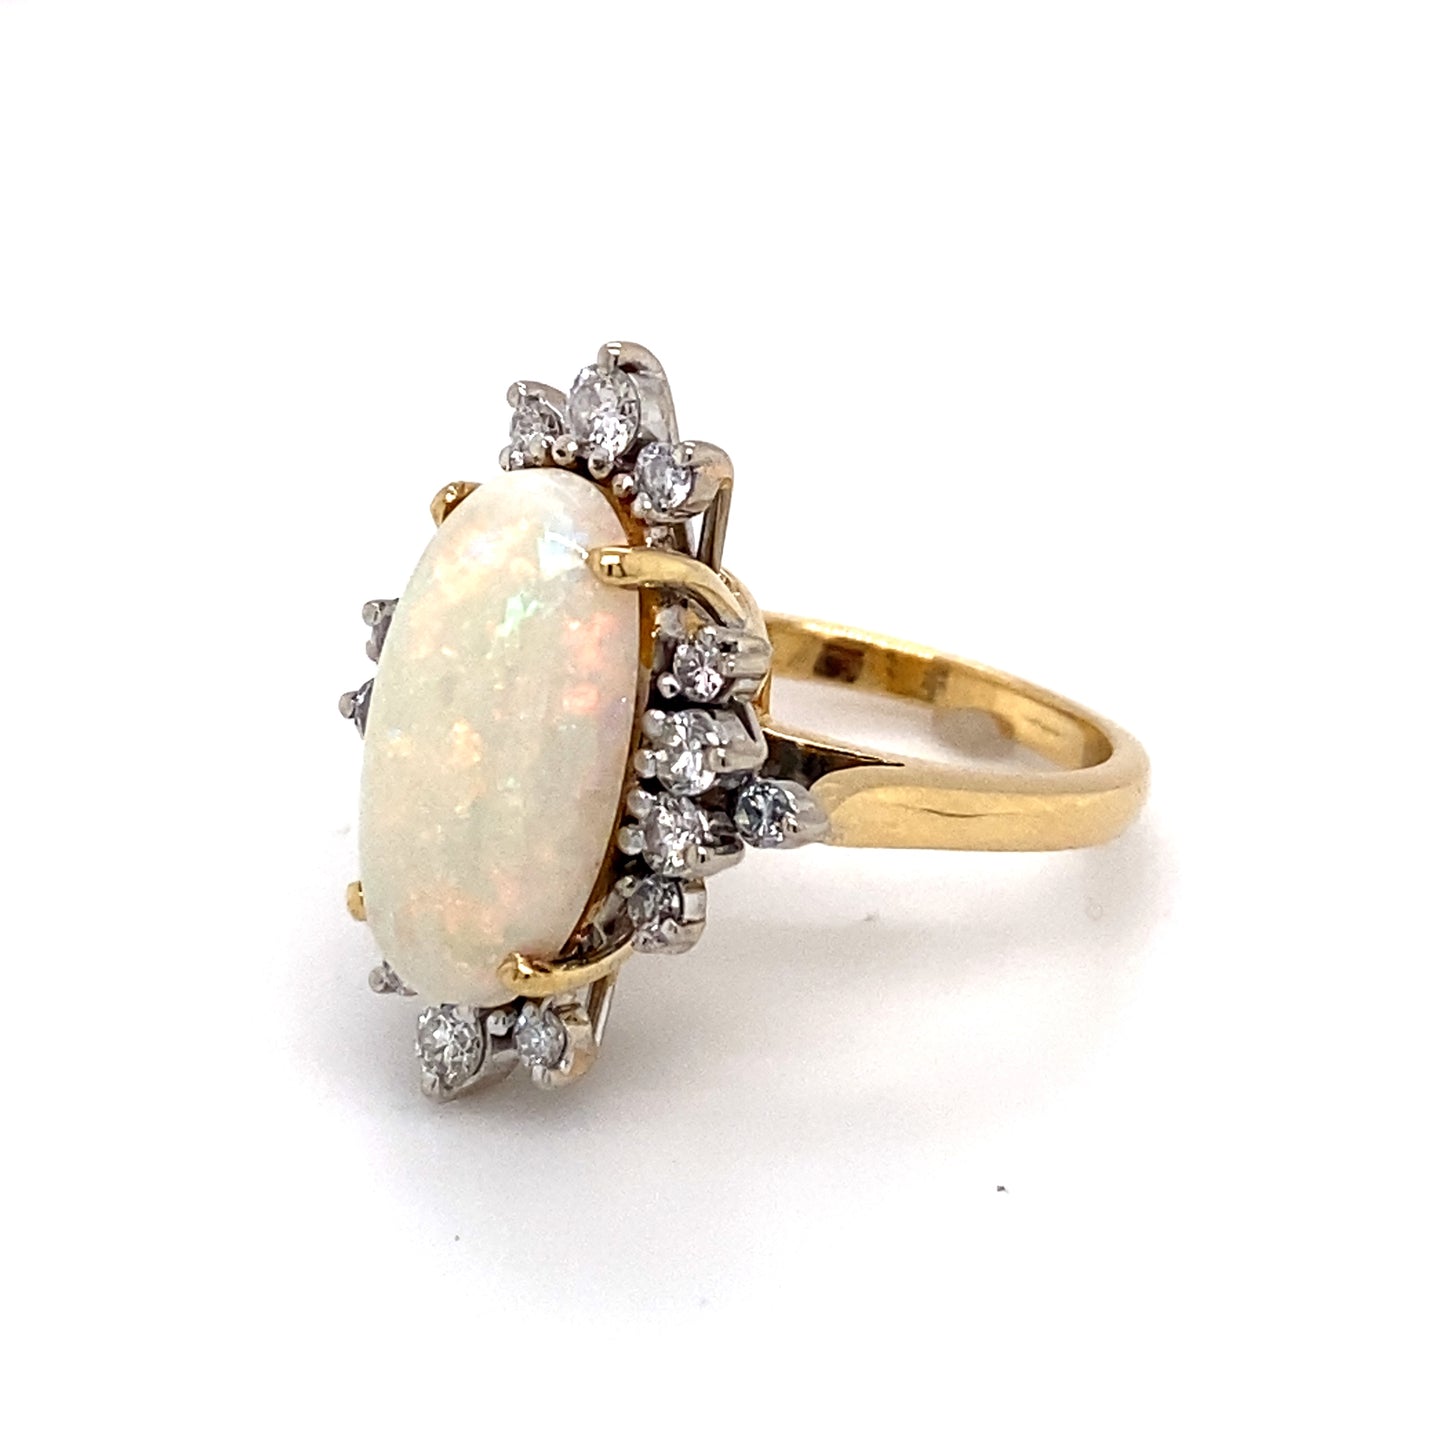 Circa 1950 3.0 Carat Opal and Diamond Ring in 18K Gold